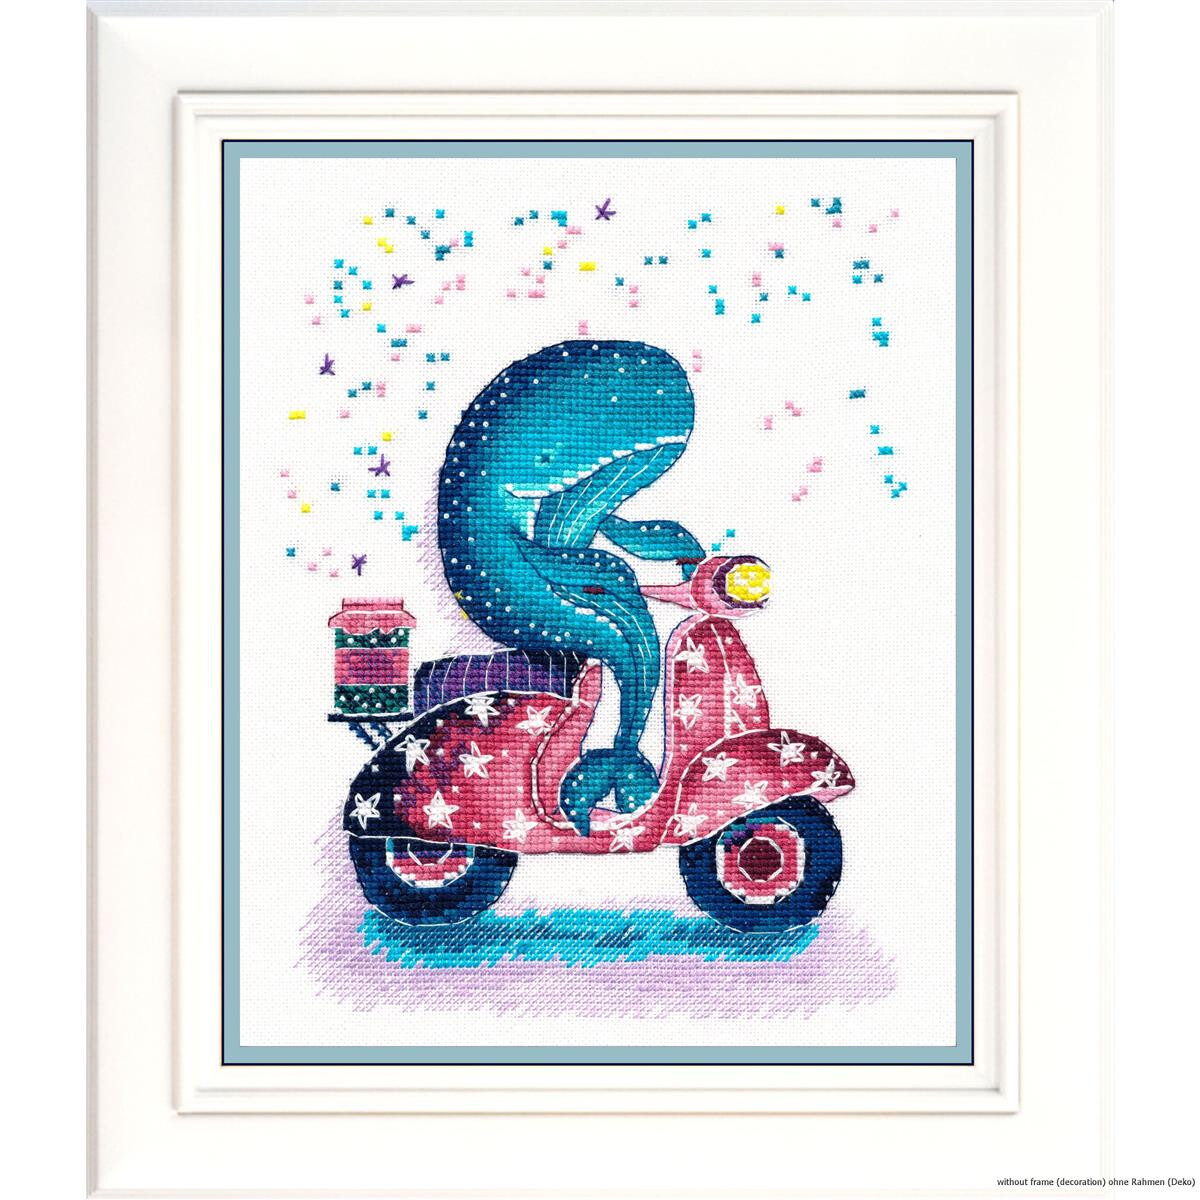 Oven counted cross stitch kit "Motorcyclist",...